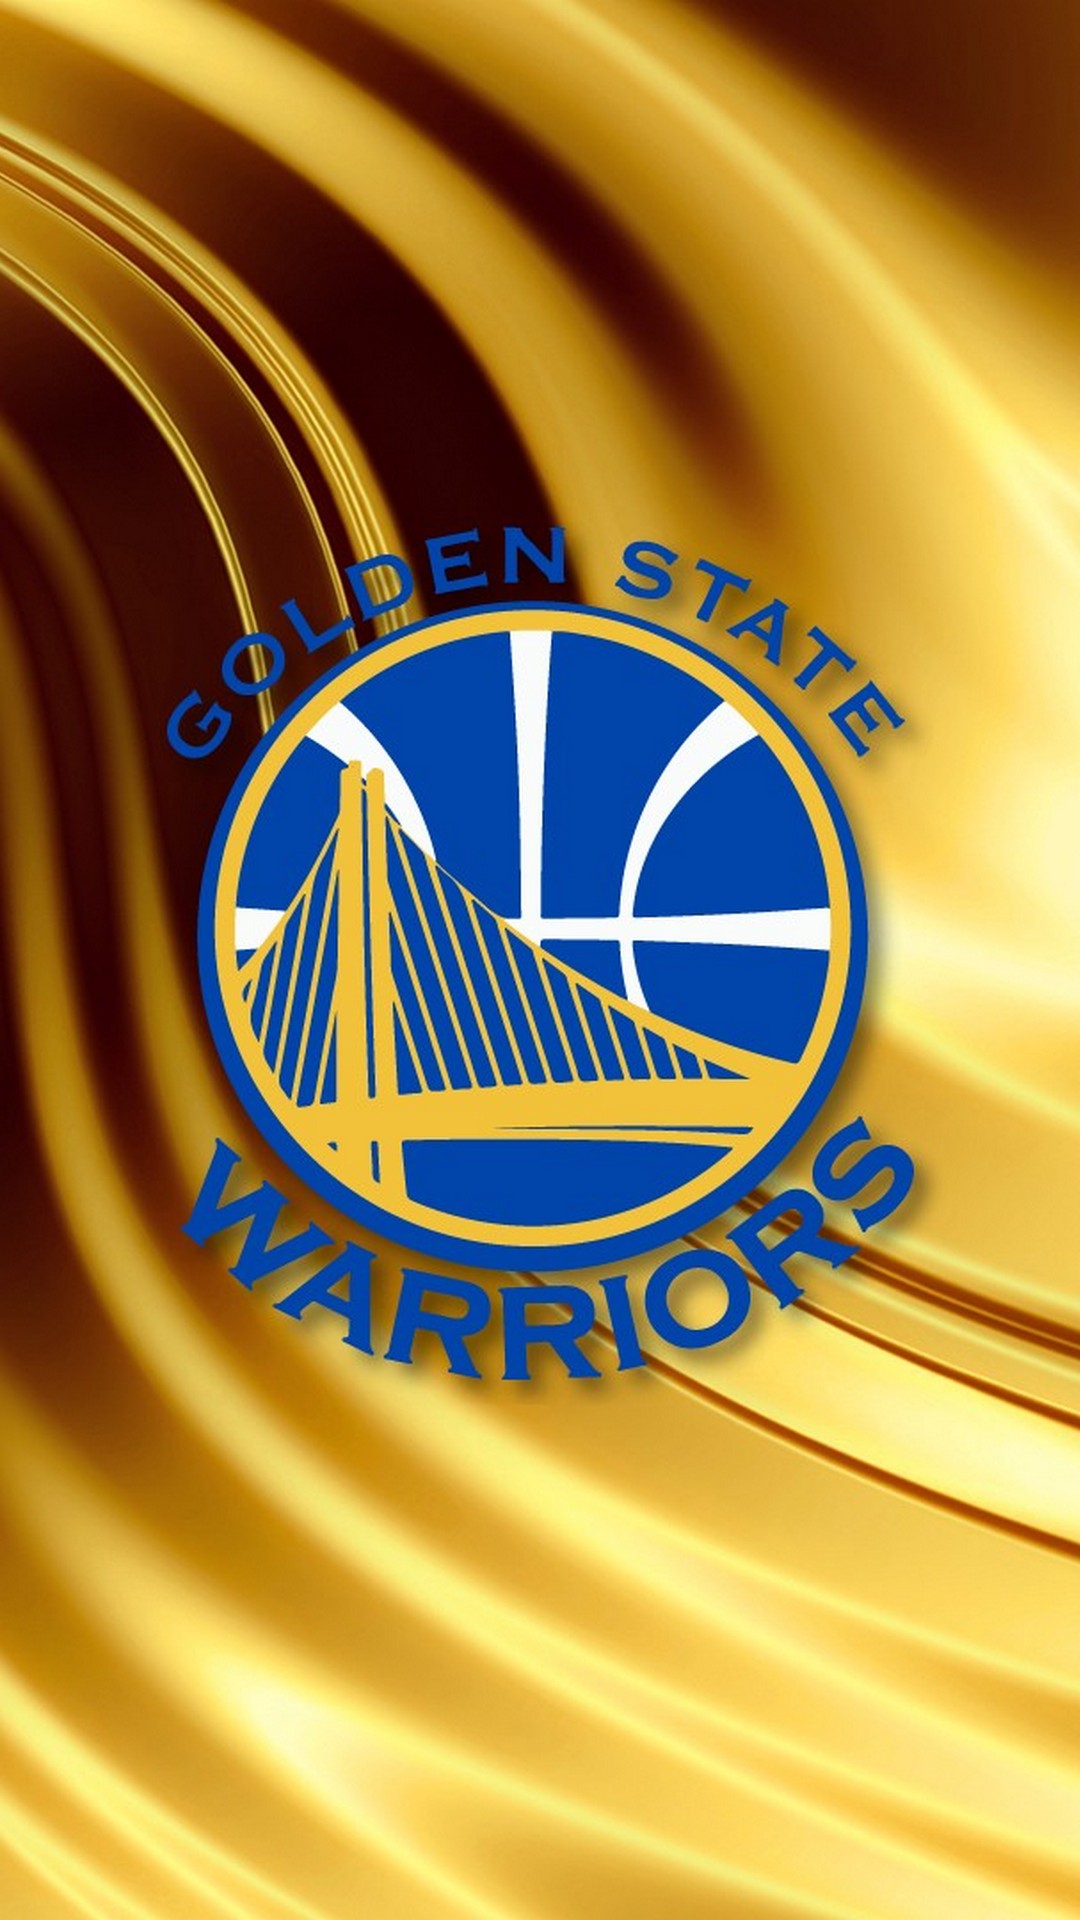 Wallpaper Golden State Warriors Mobile with image resolution 1080x1920 pixel. You can make this wallpaper for your Desktop Computer Backgrounds, Mac Wallpapers, Android Lock screen or iPhone Screensavers